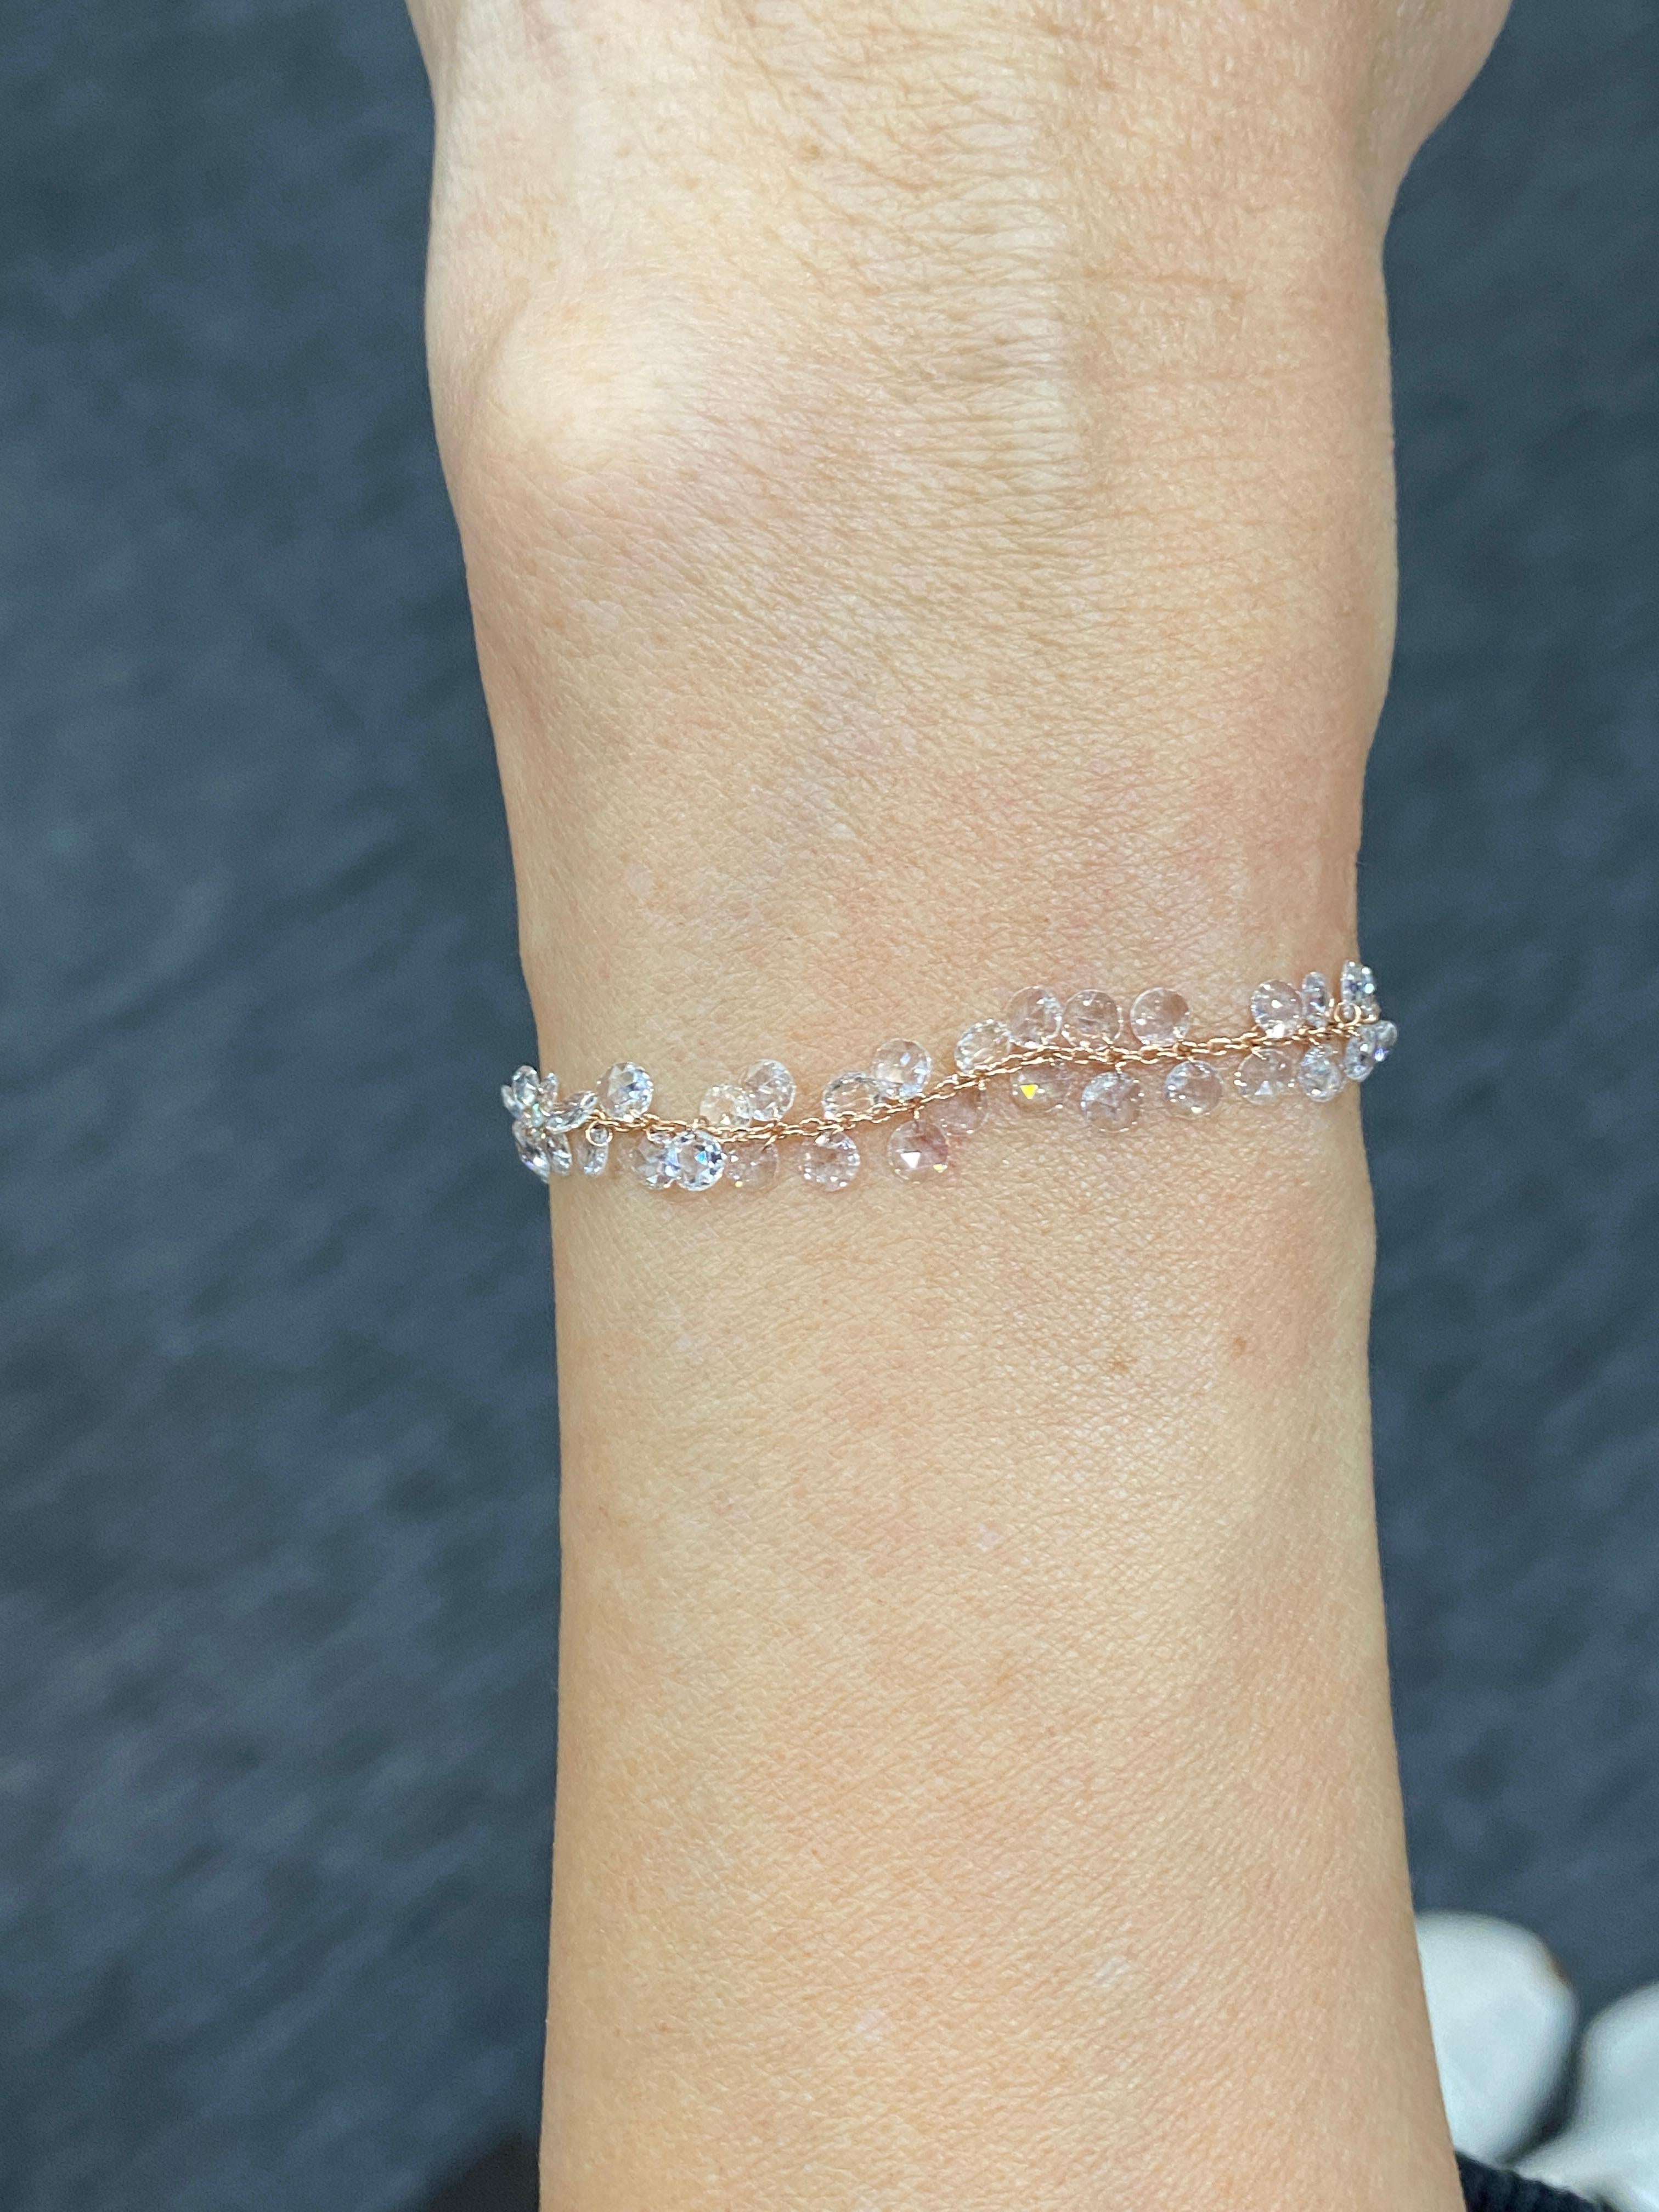 JR 2.00 Carat Dangling Rose Cut Diamond 18 Karat Rose Gold Bracelet

Our dangling rose-cut diamond bracelet is extremely wearable. Its versatility and classic design make it a great accompaniment to various occasions. Beautifully made with Drilled